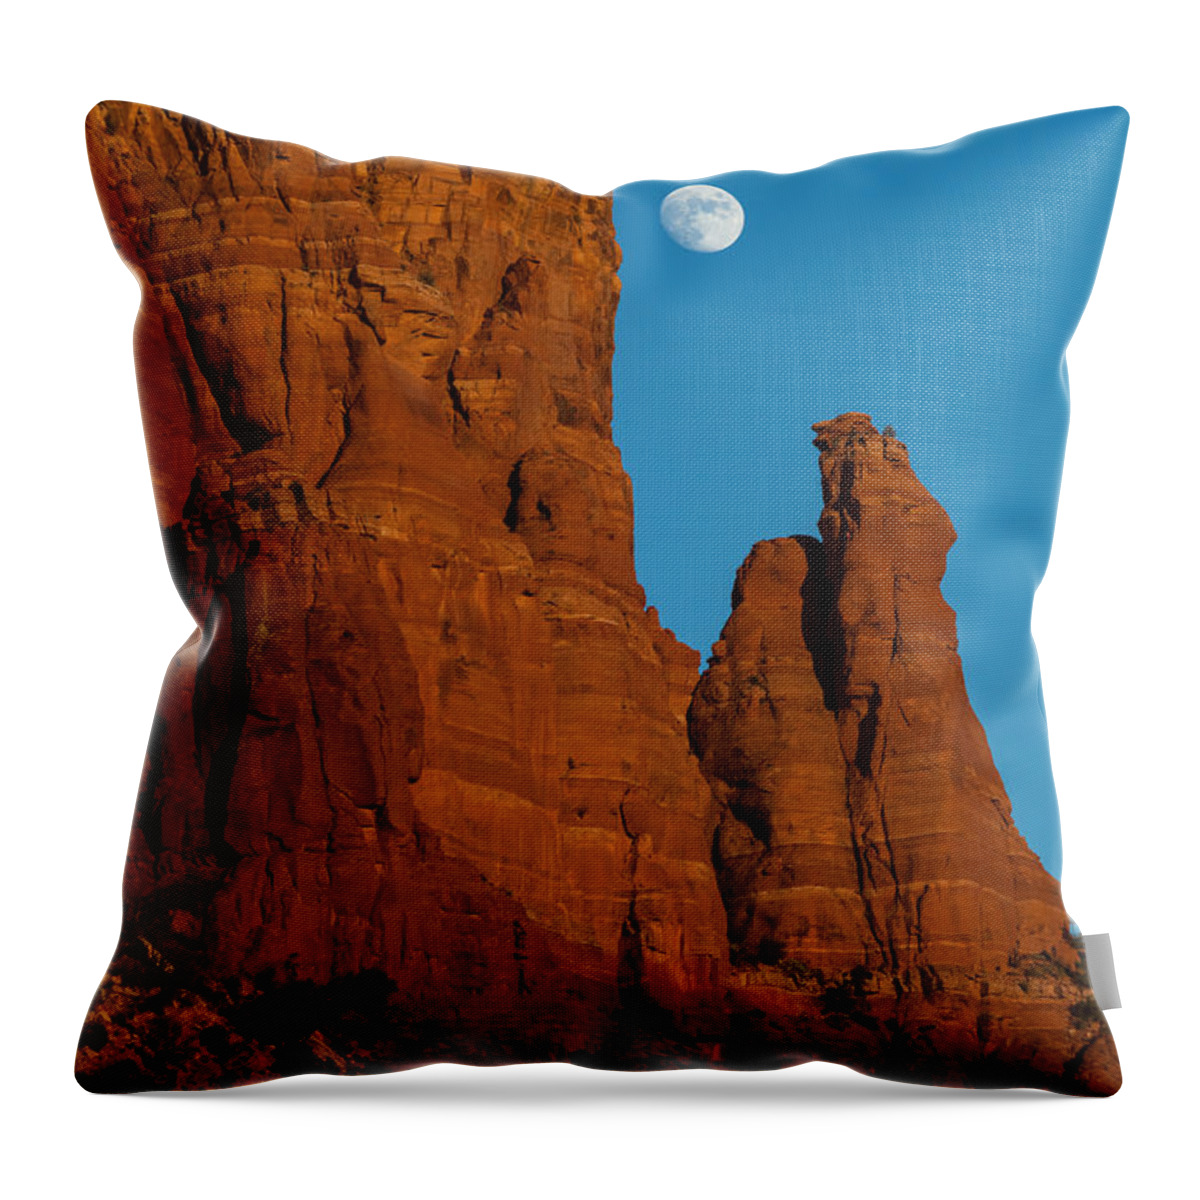 Arizona Throw Pillow featuring the photograph Moon Over Chicken Point by Ed Gleichman